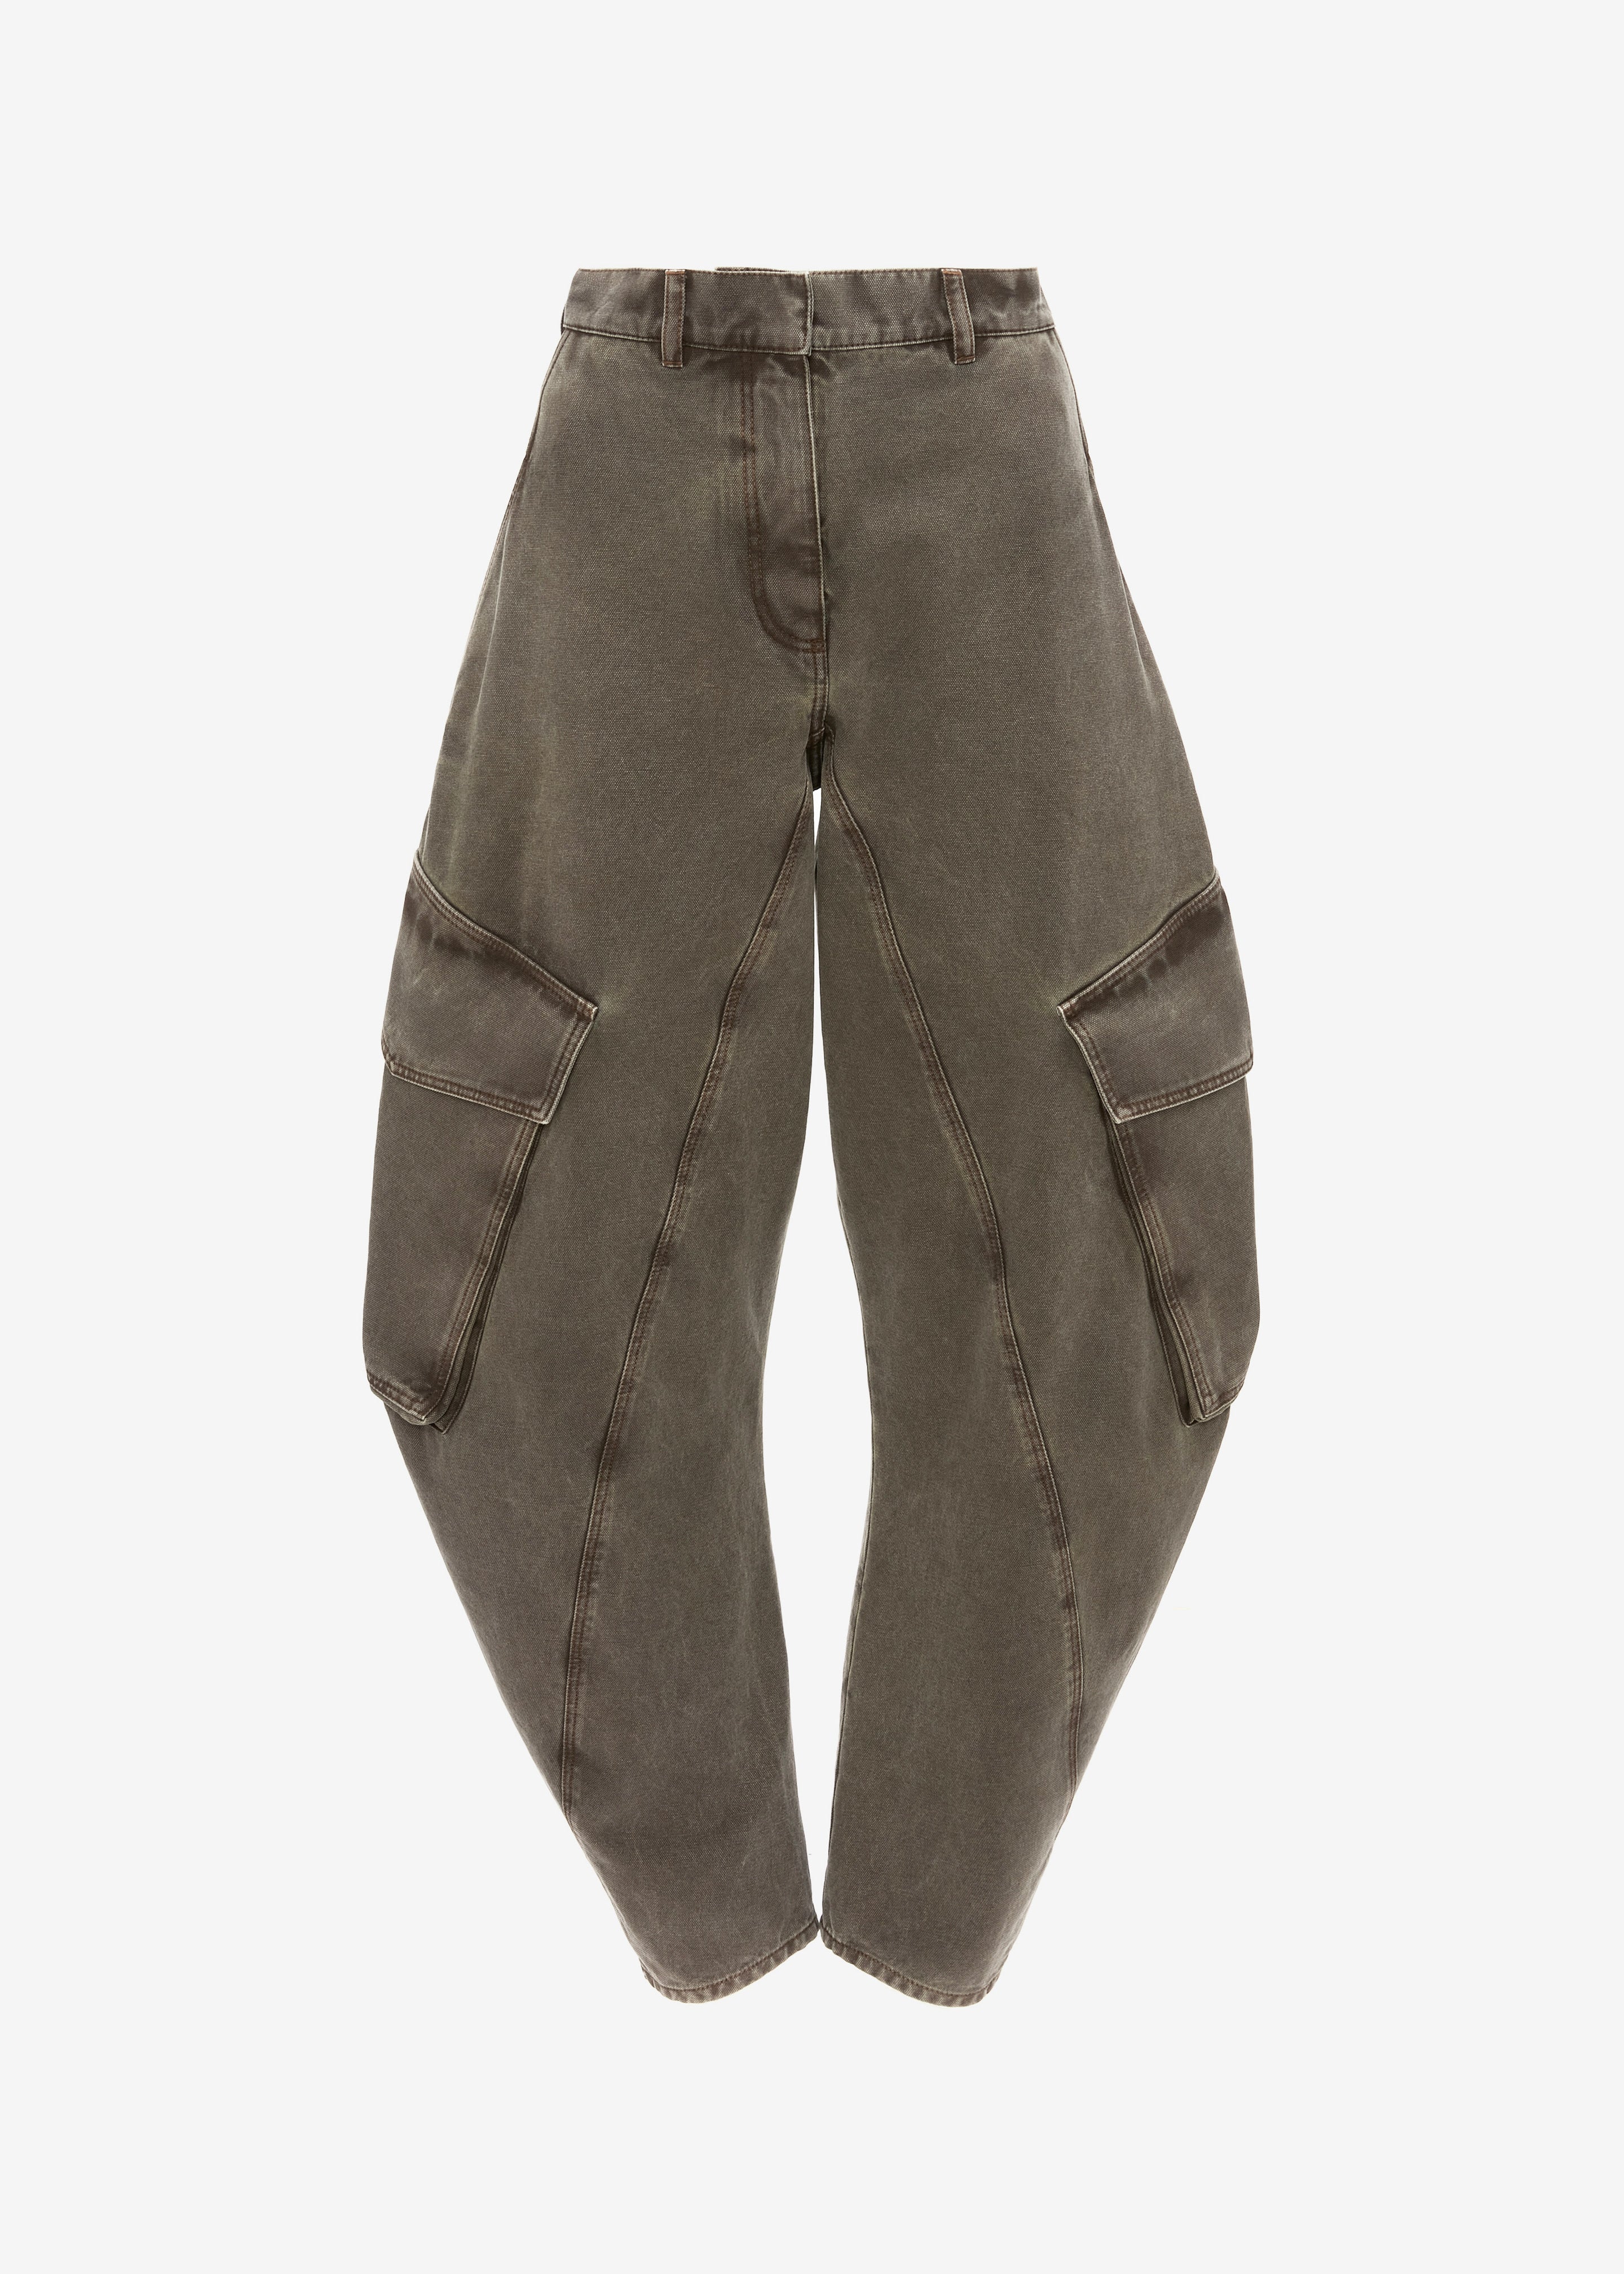 JW Anderson Twisted Cargo Trousers - Khaki - 8